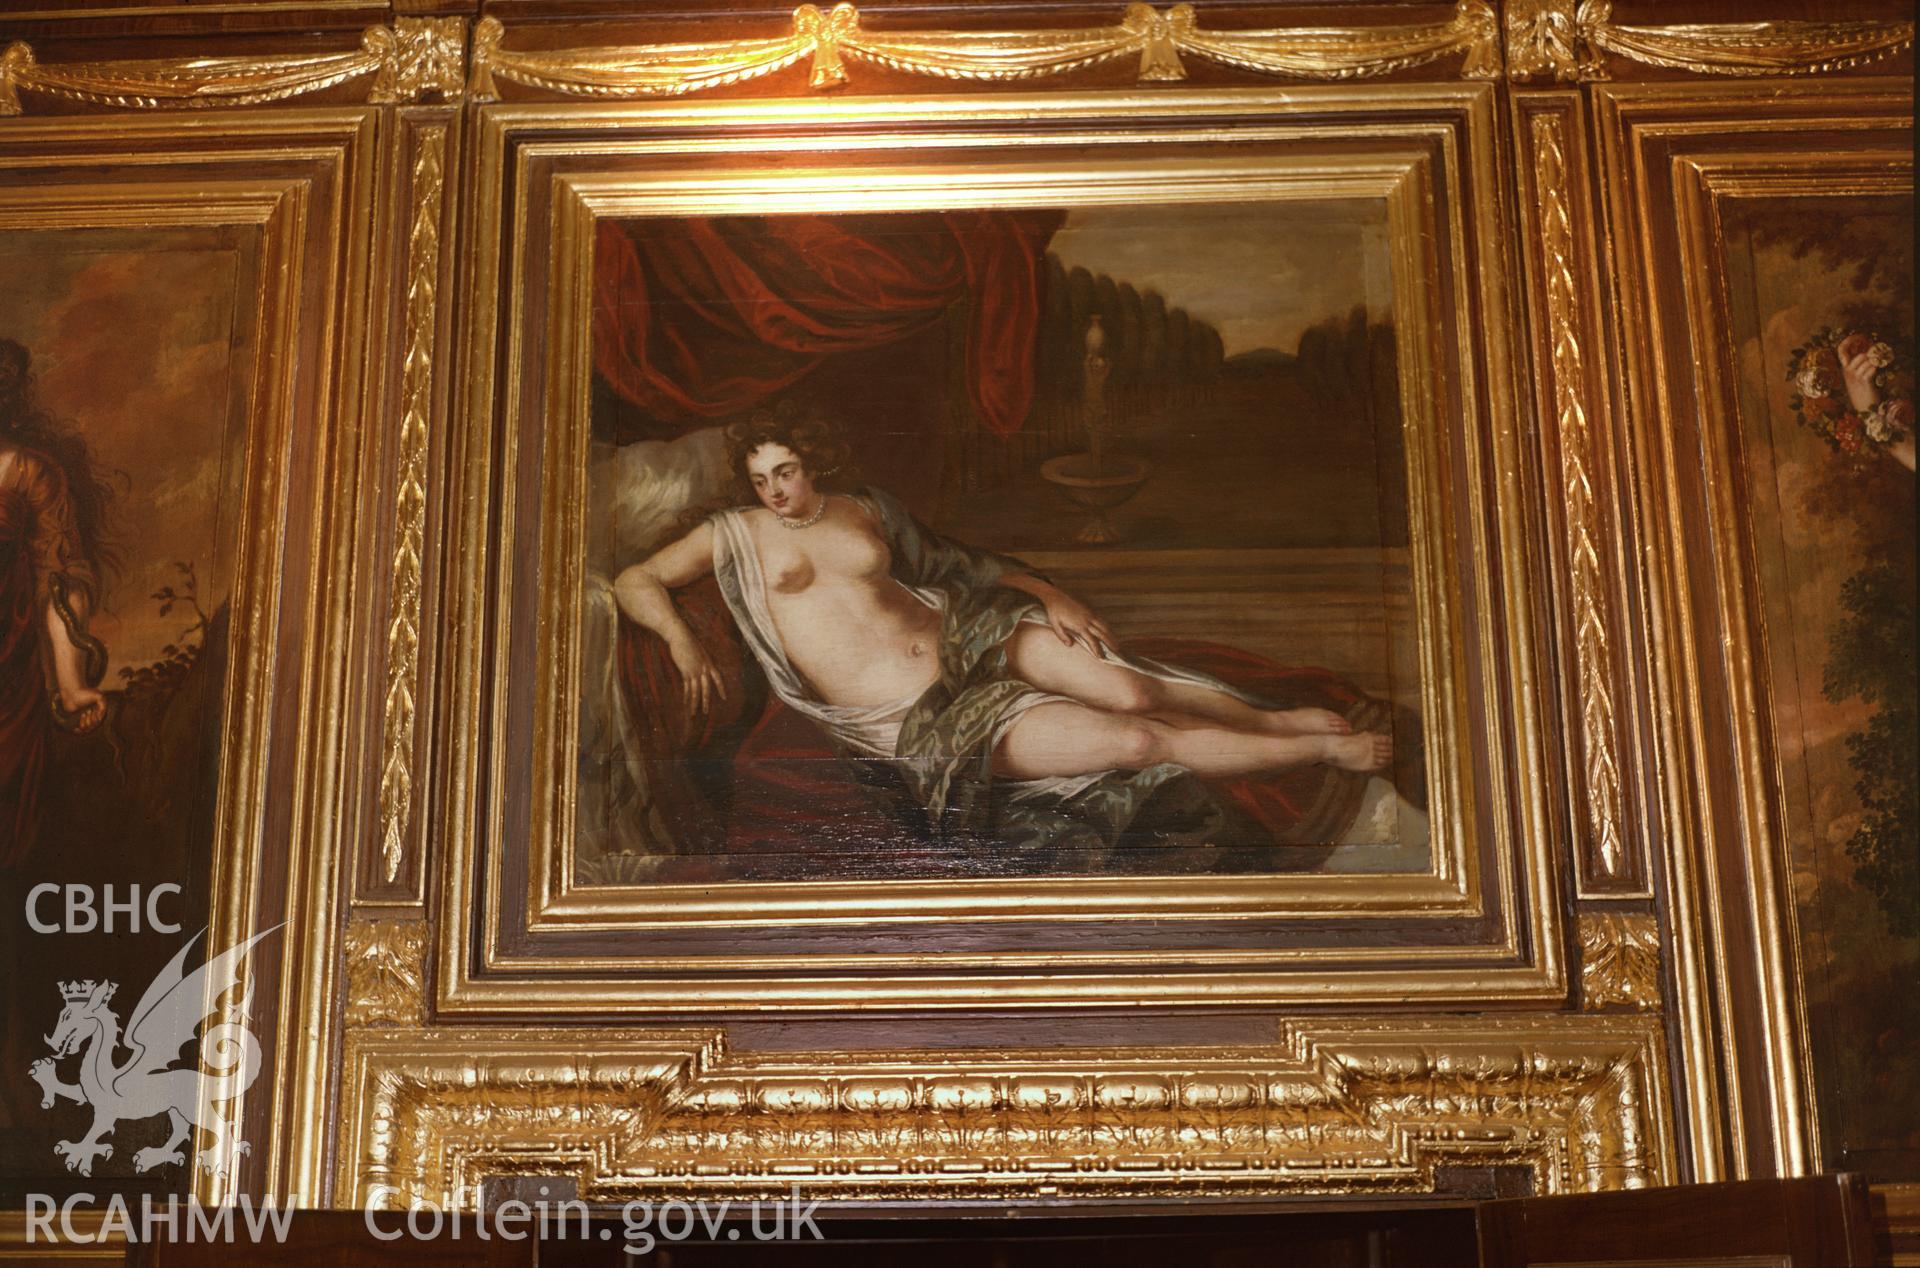 RCAHMW colour transparency showing view of The Gilt Room at Tredegar House, Newport, taken by RCAHMW c.2003